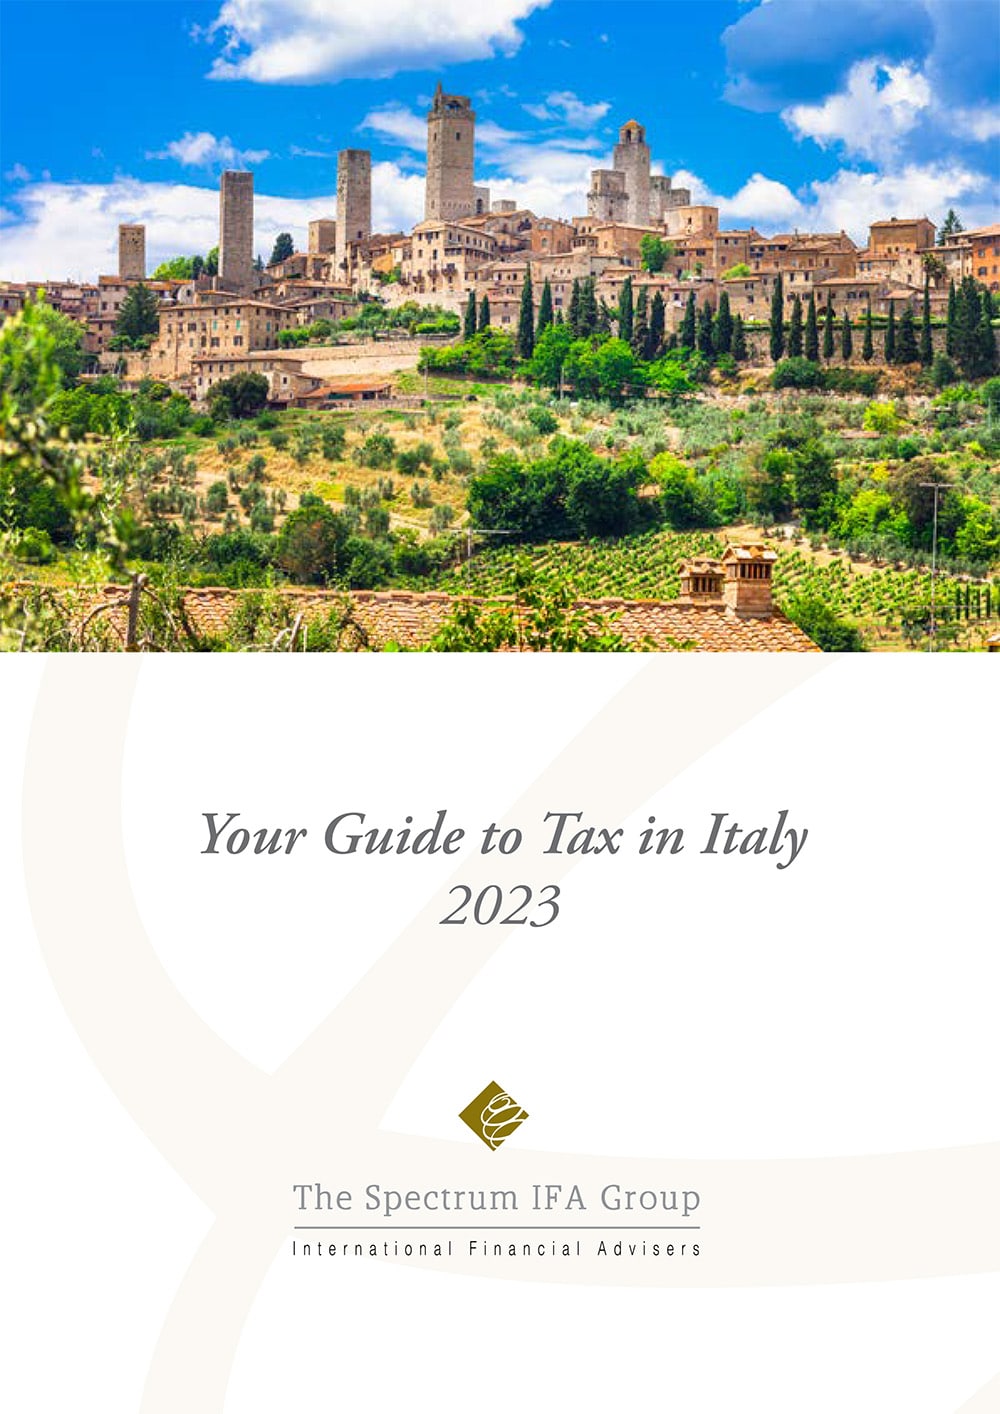 Your tax guide to Italy